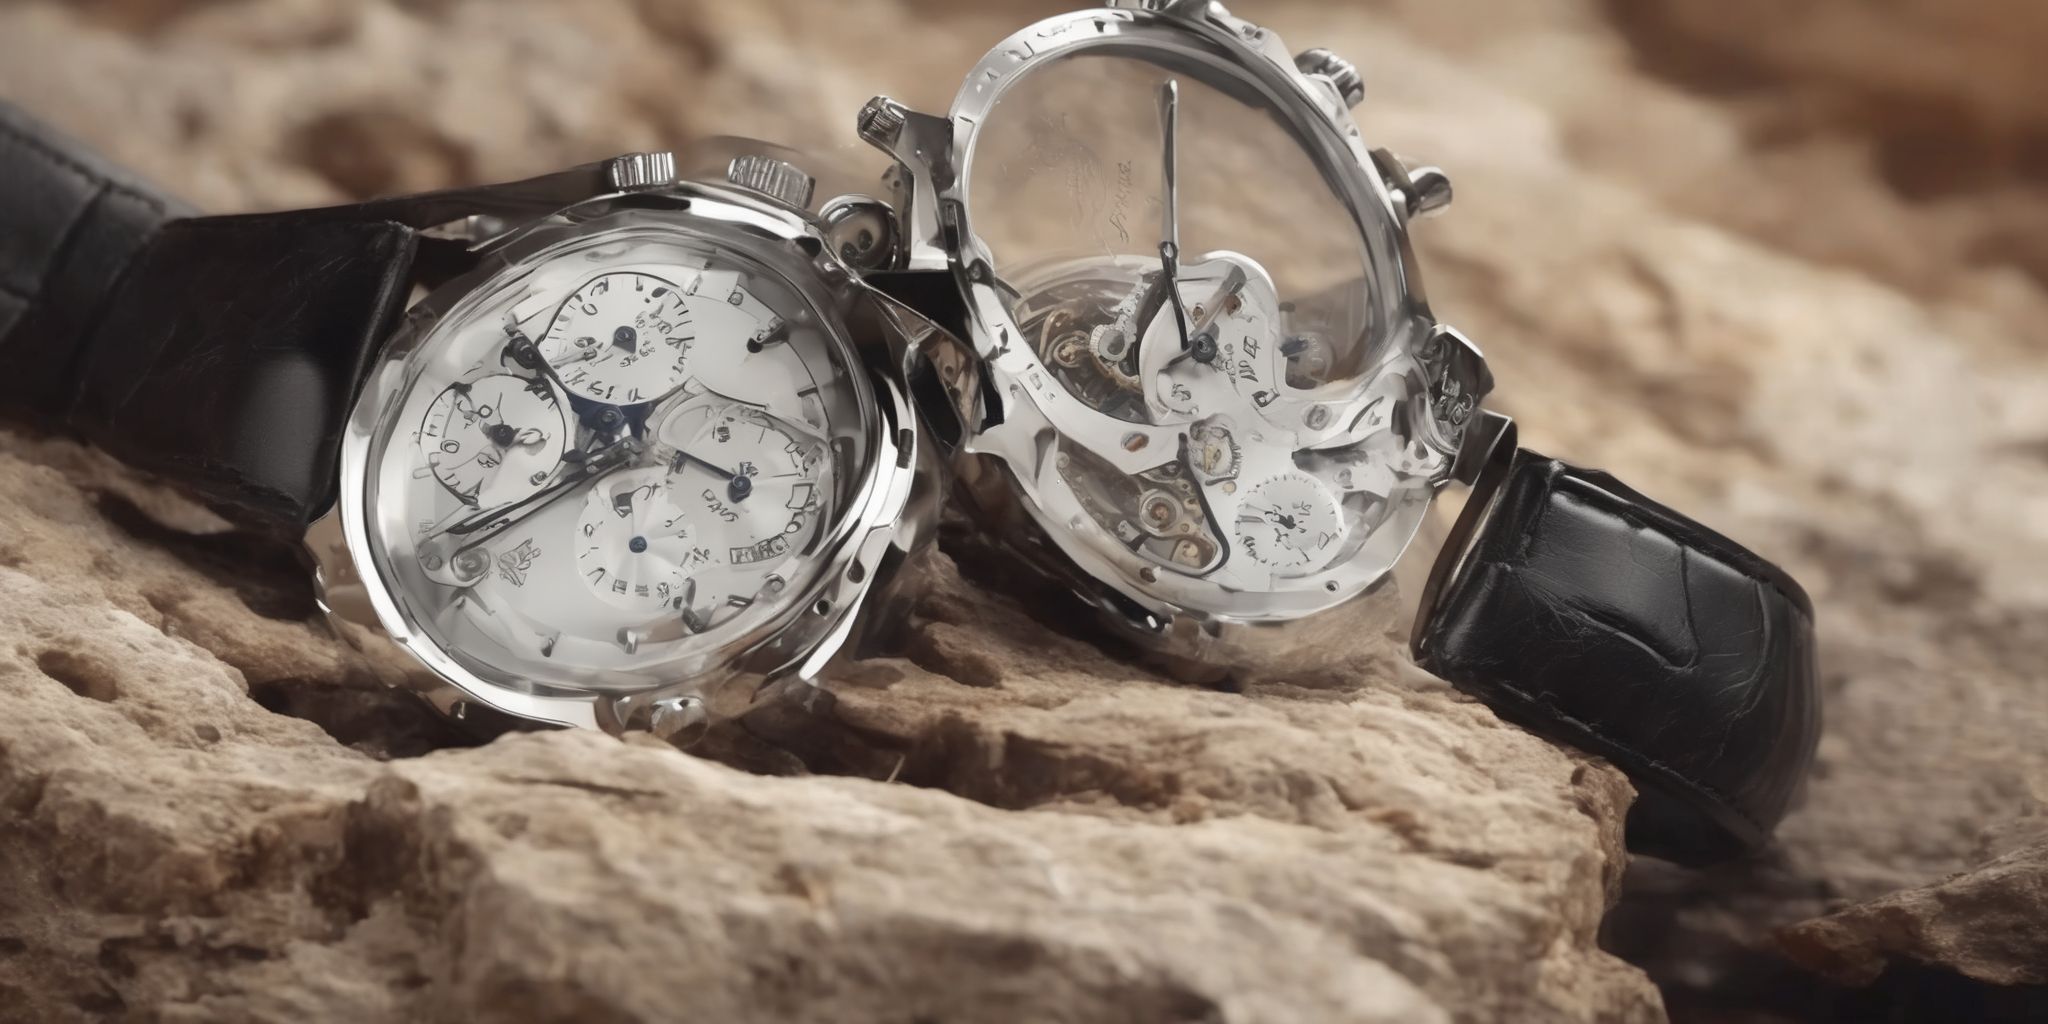 Watch  in realistic, photographic style